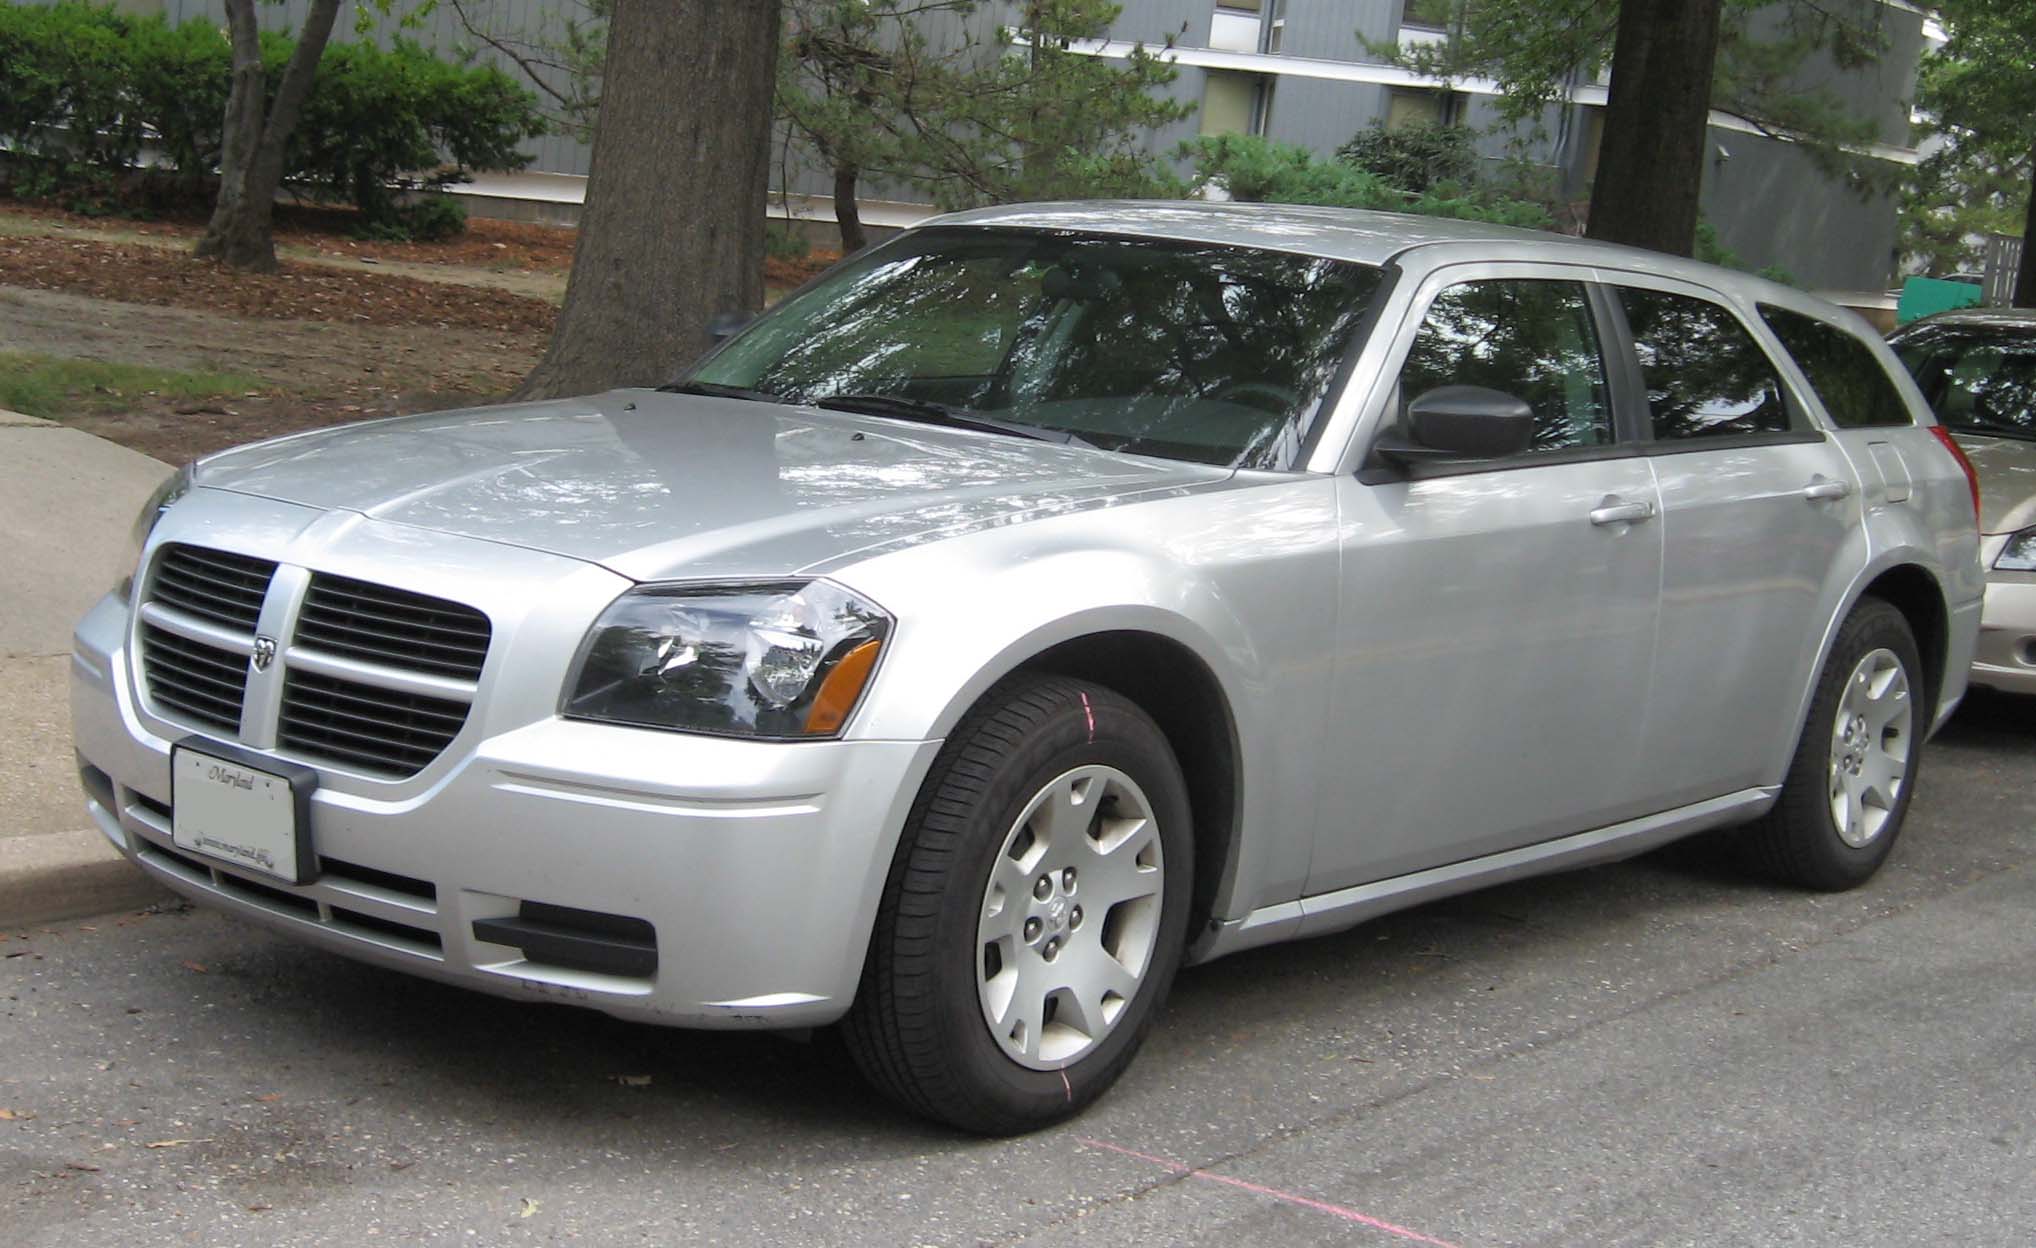 The Dodge Magnum wagon is an awe inspiring machine in many ways.